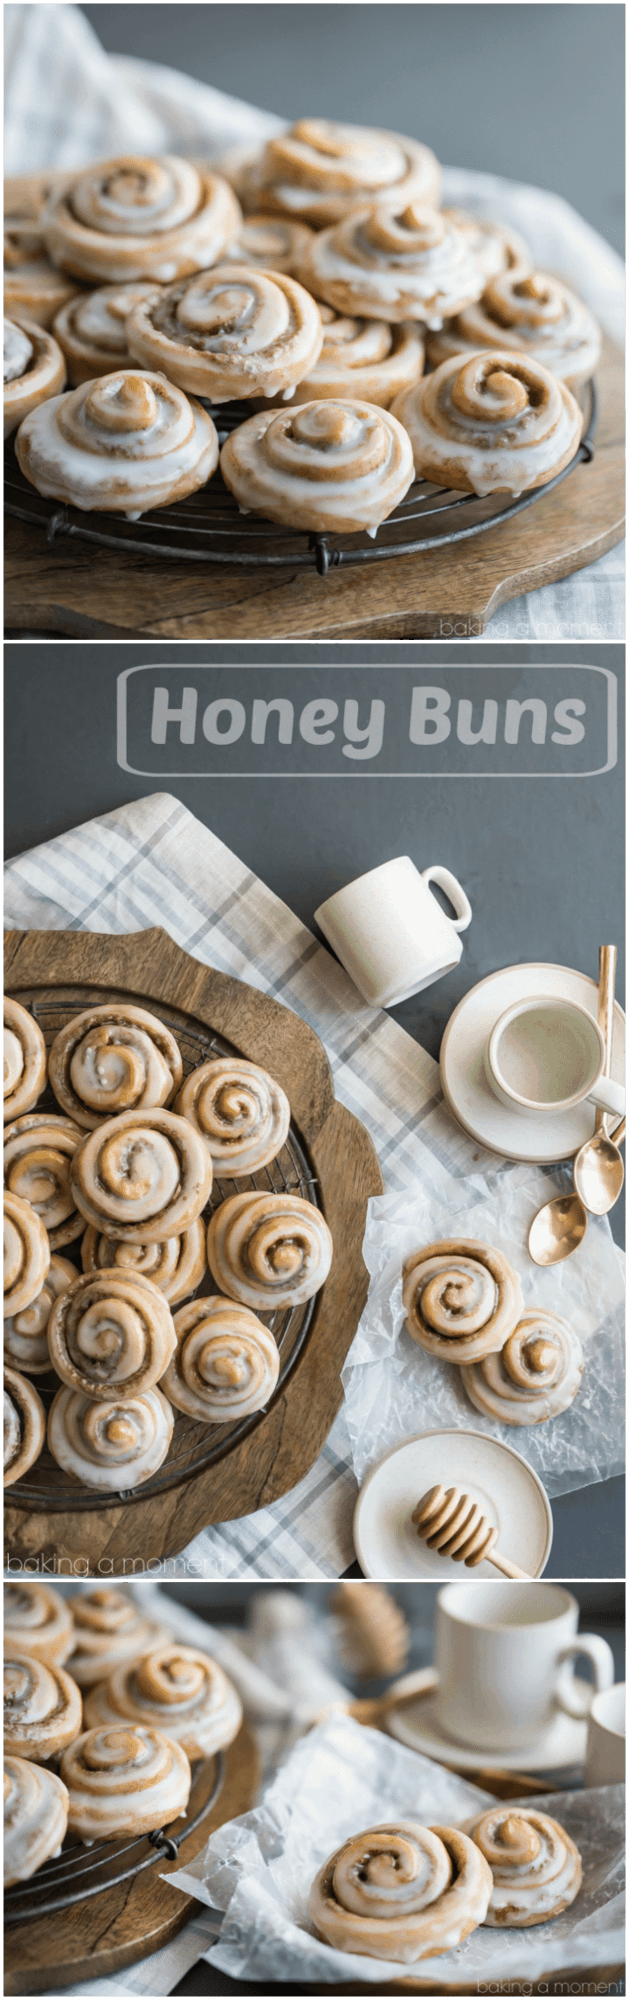 This homemade Honey Buns recipe took me straight back to my childhood! Perfect snack or on-the-go breakfast, and the dough was really easy to make. 